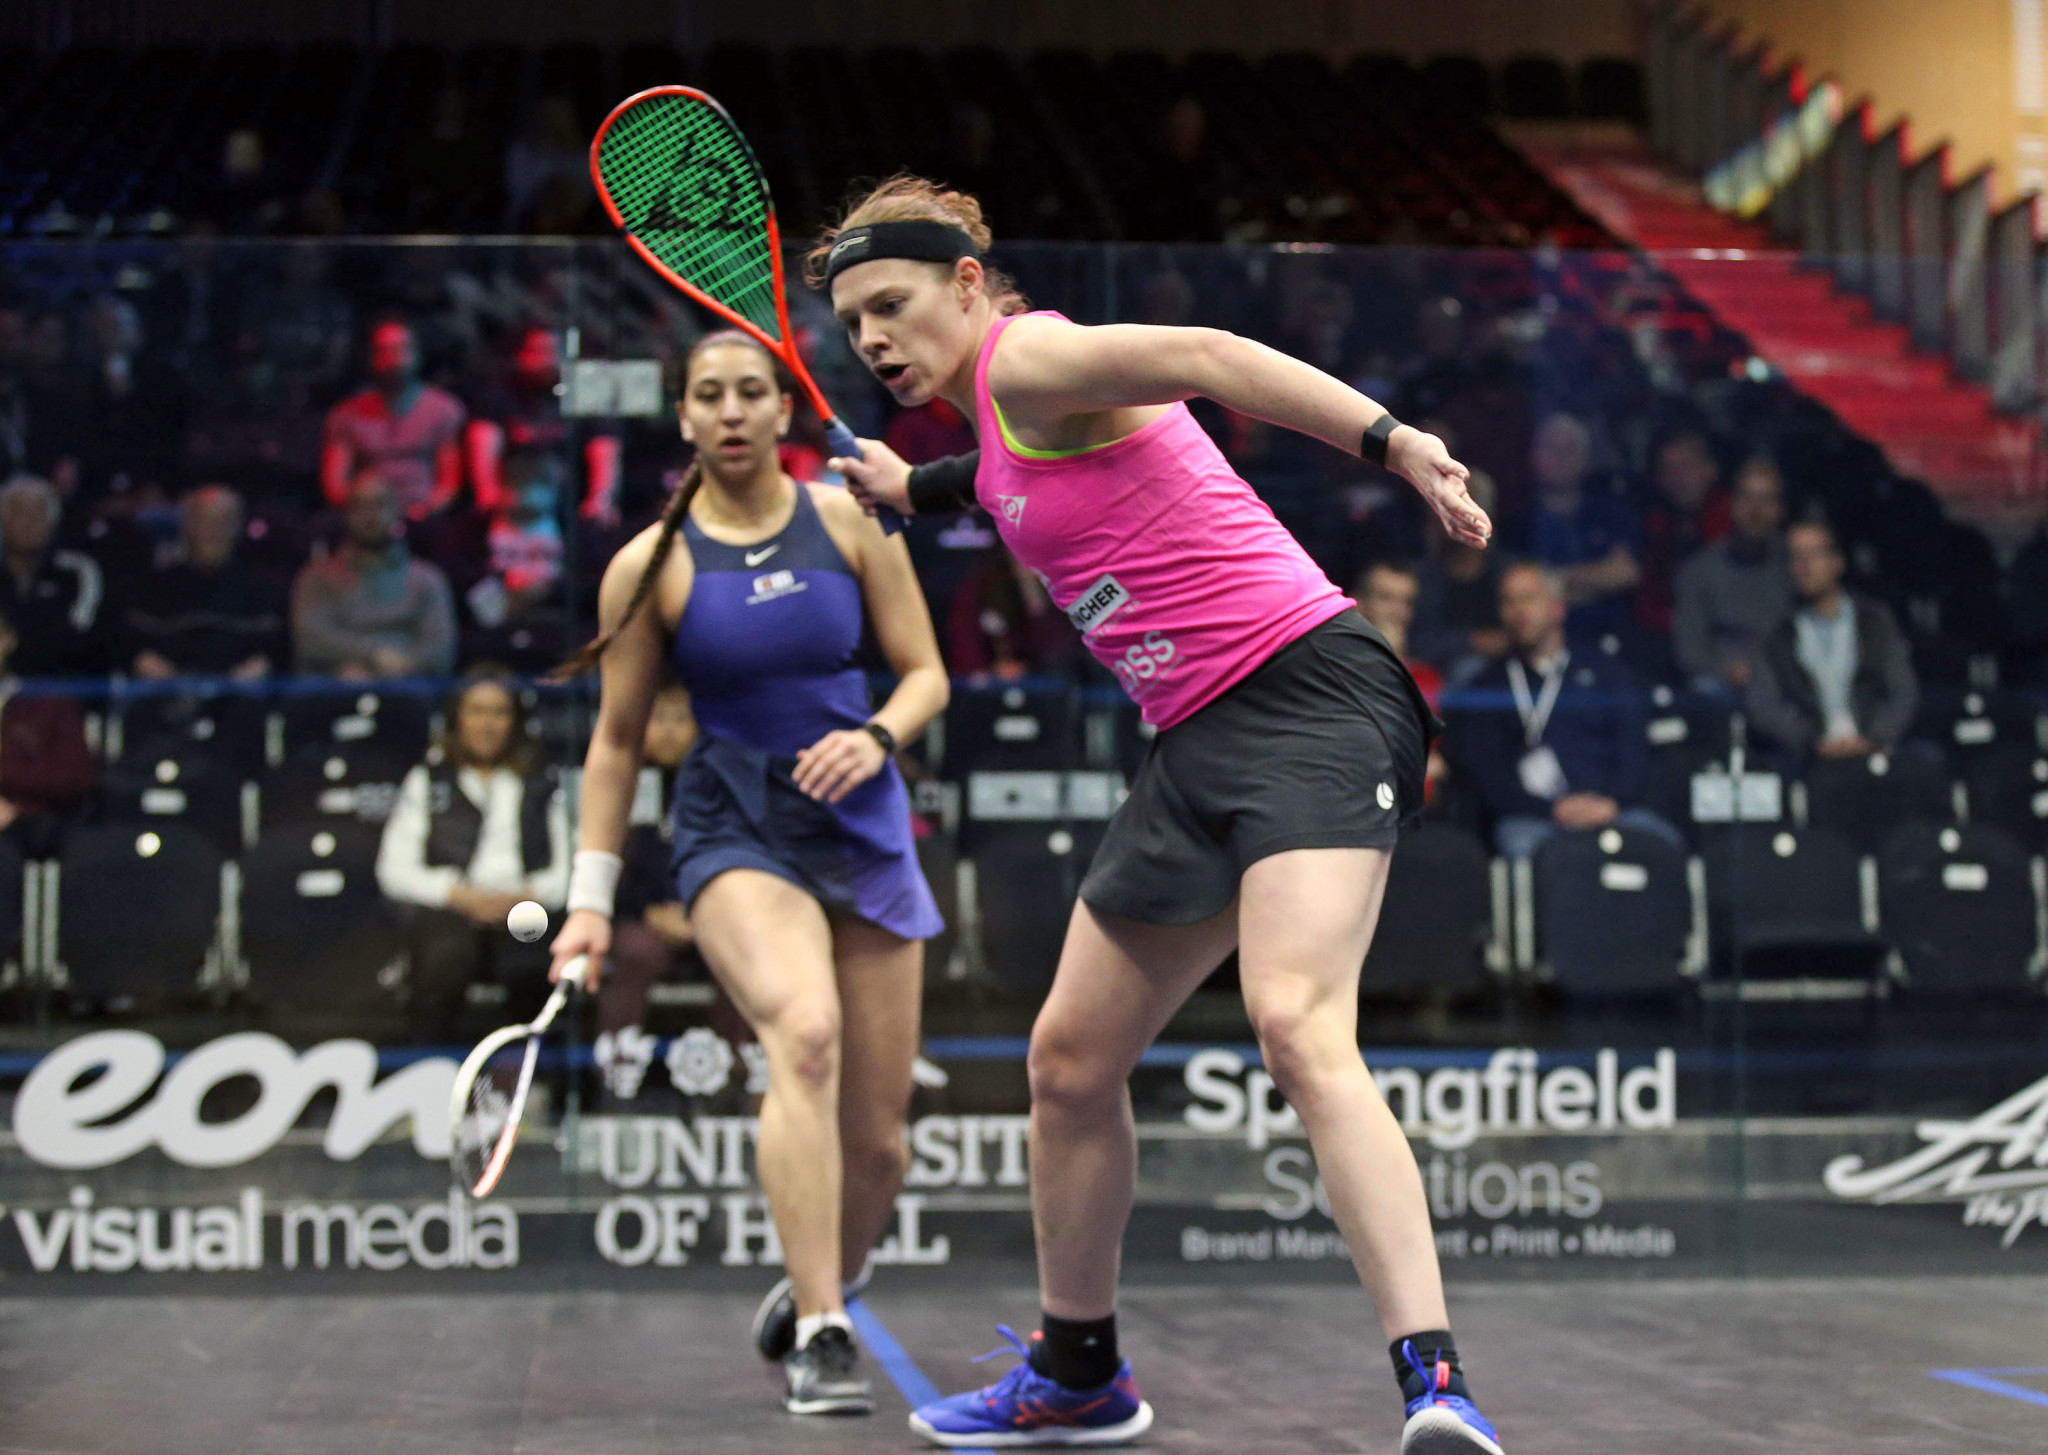 Sarah-Jane Perry won through to the last eight in straight games ©PSA